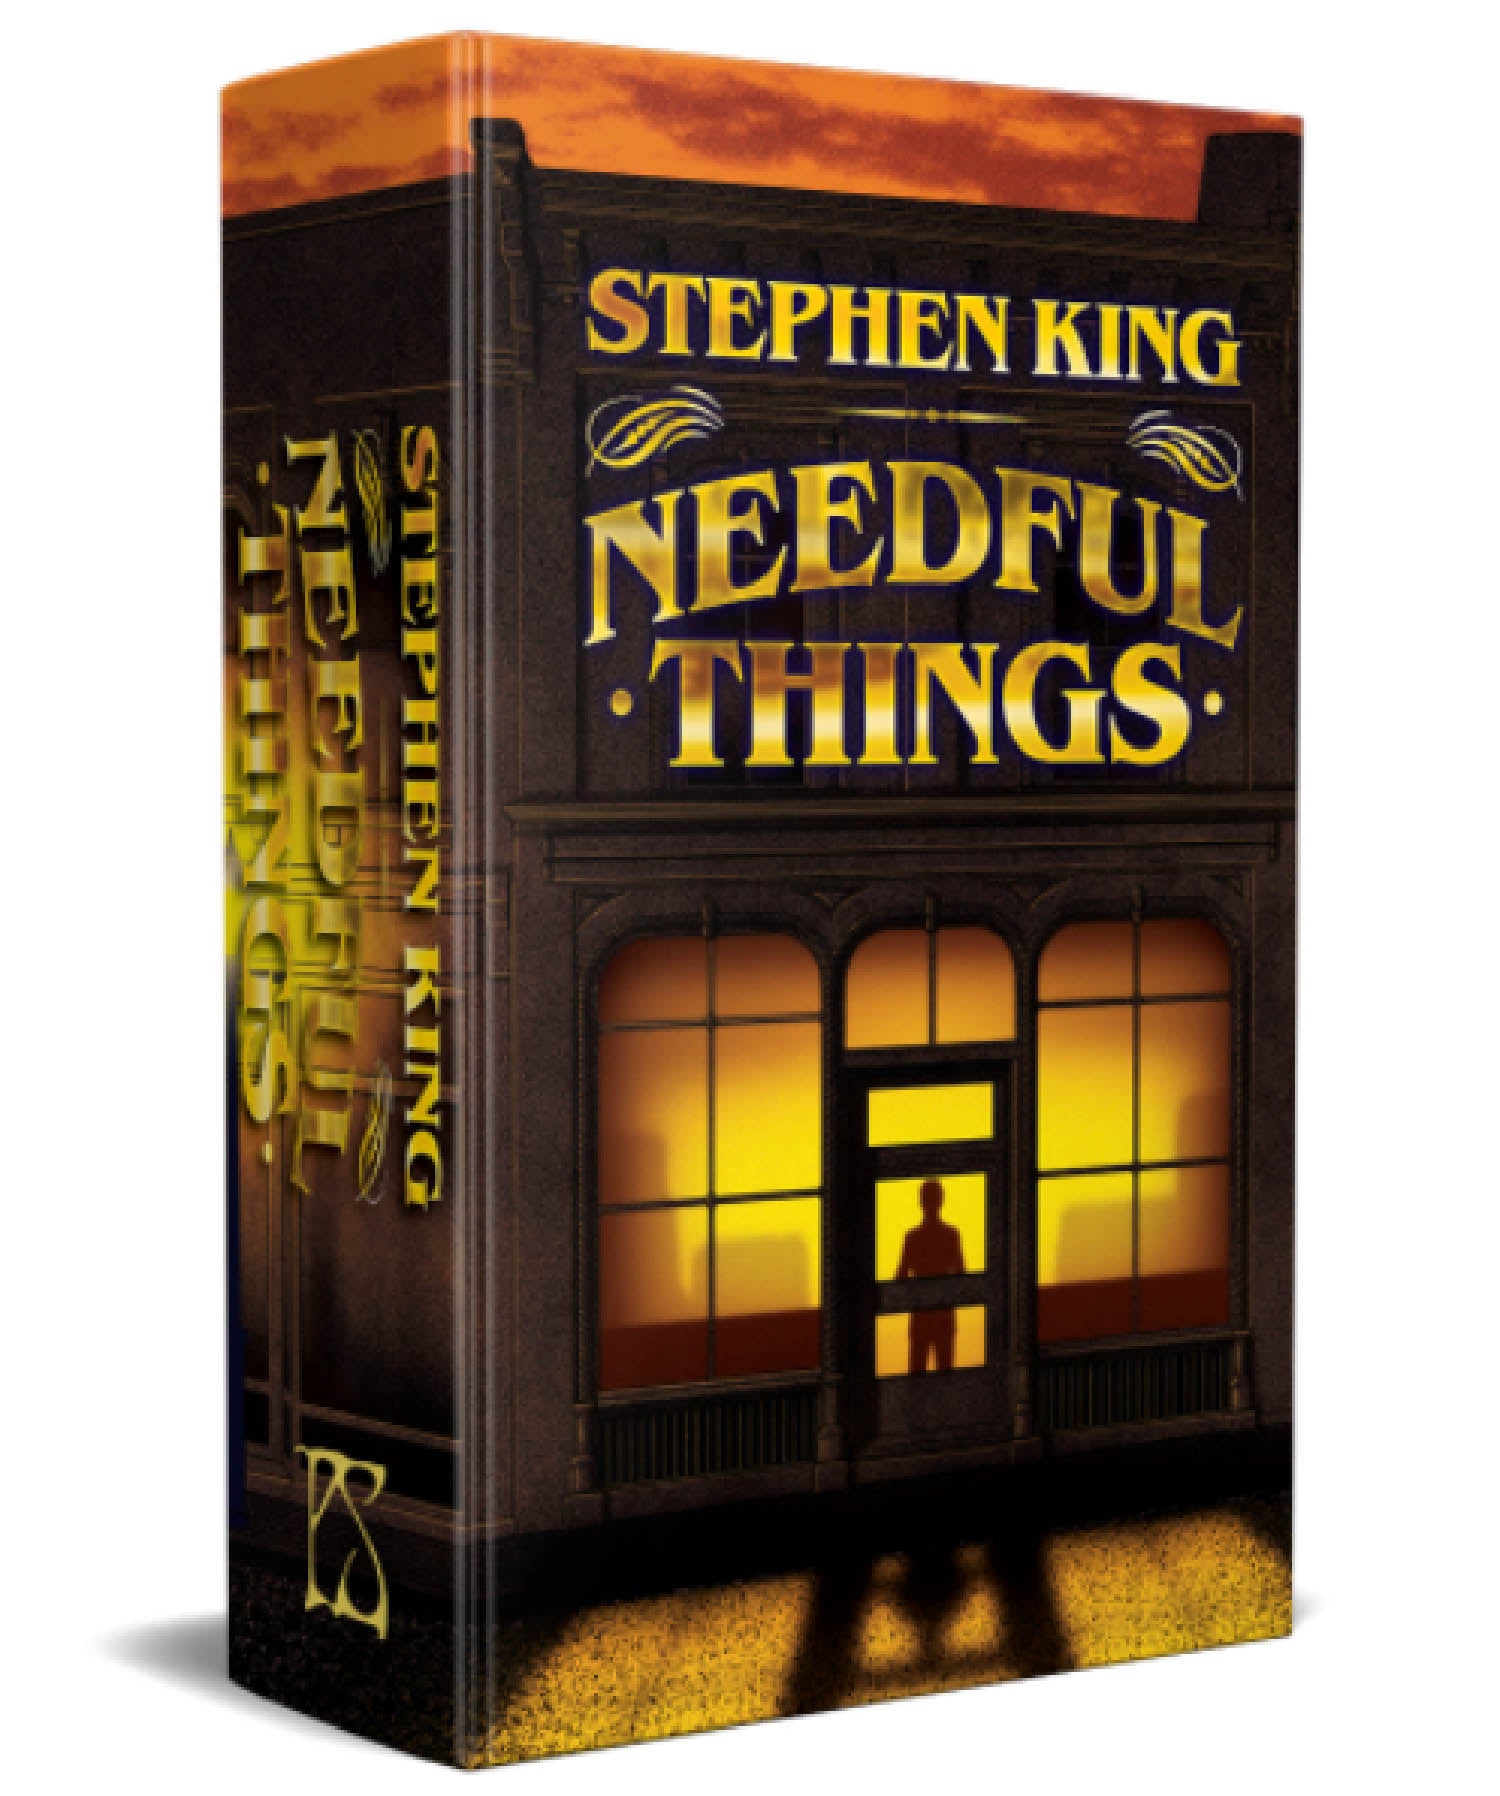 Needful Things by Stephen King Limited Edition Included as a Free Bonus with Phoenix 451 by Ray Bradbury Lettered Edition!